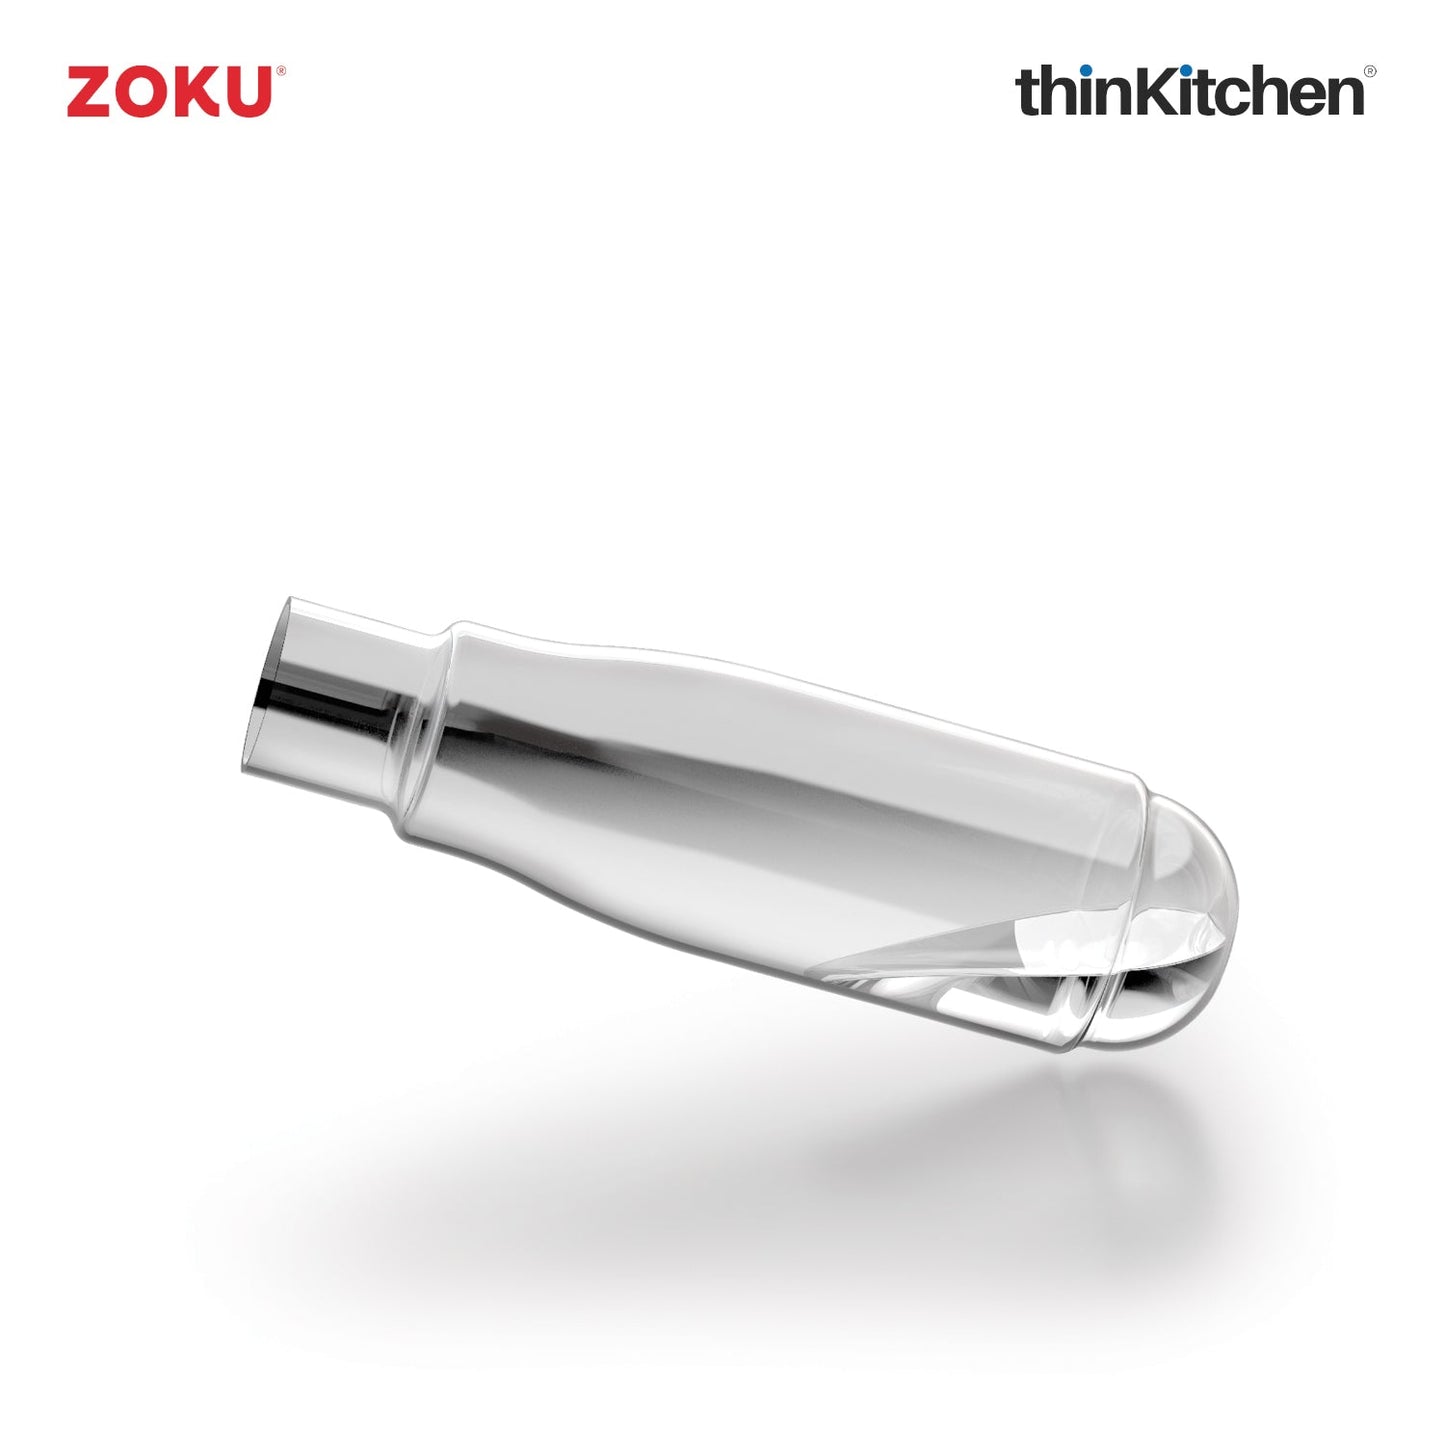 thinKitchen™ Zoku Red Everyday Outer Core Bottle, 475ml